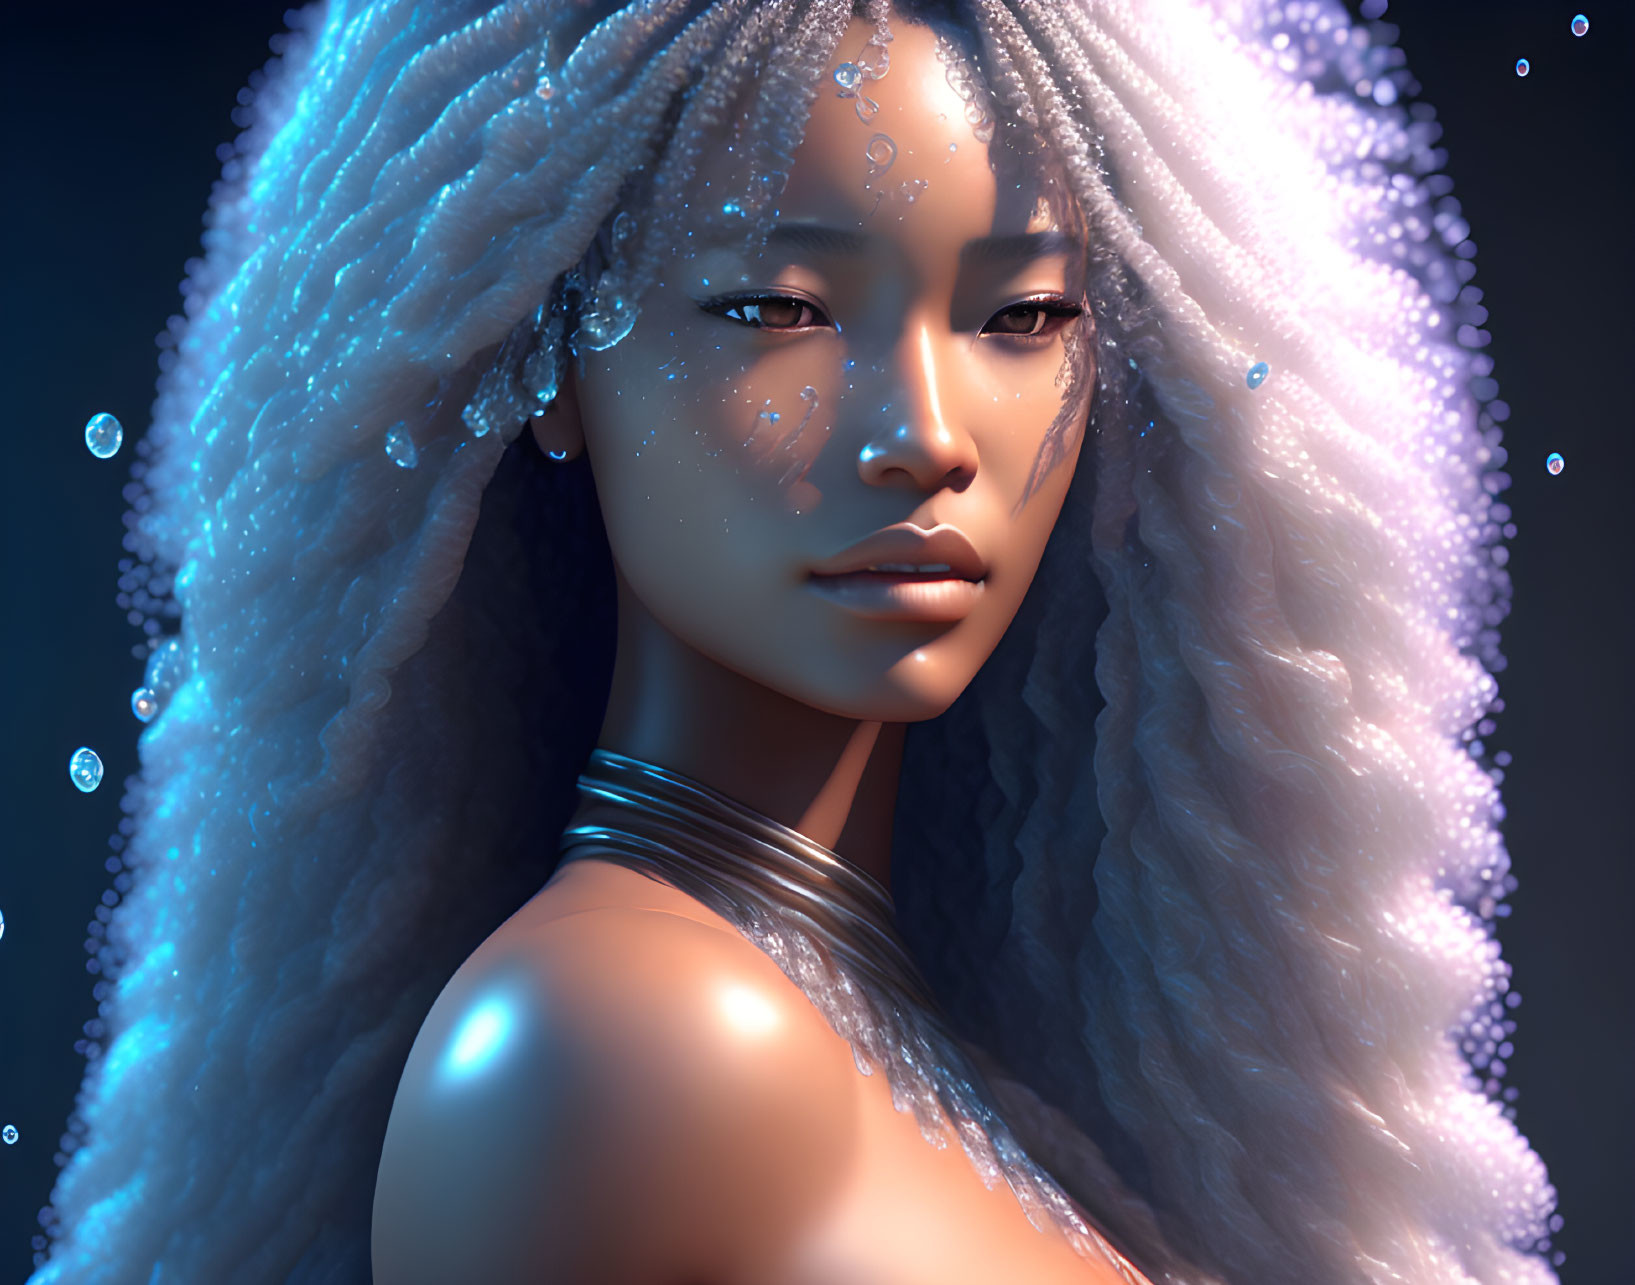 Woman with hair made of water 